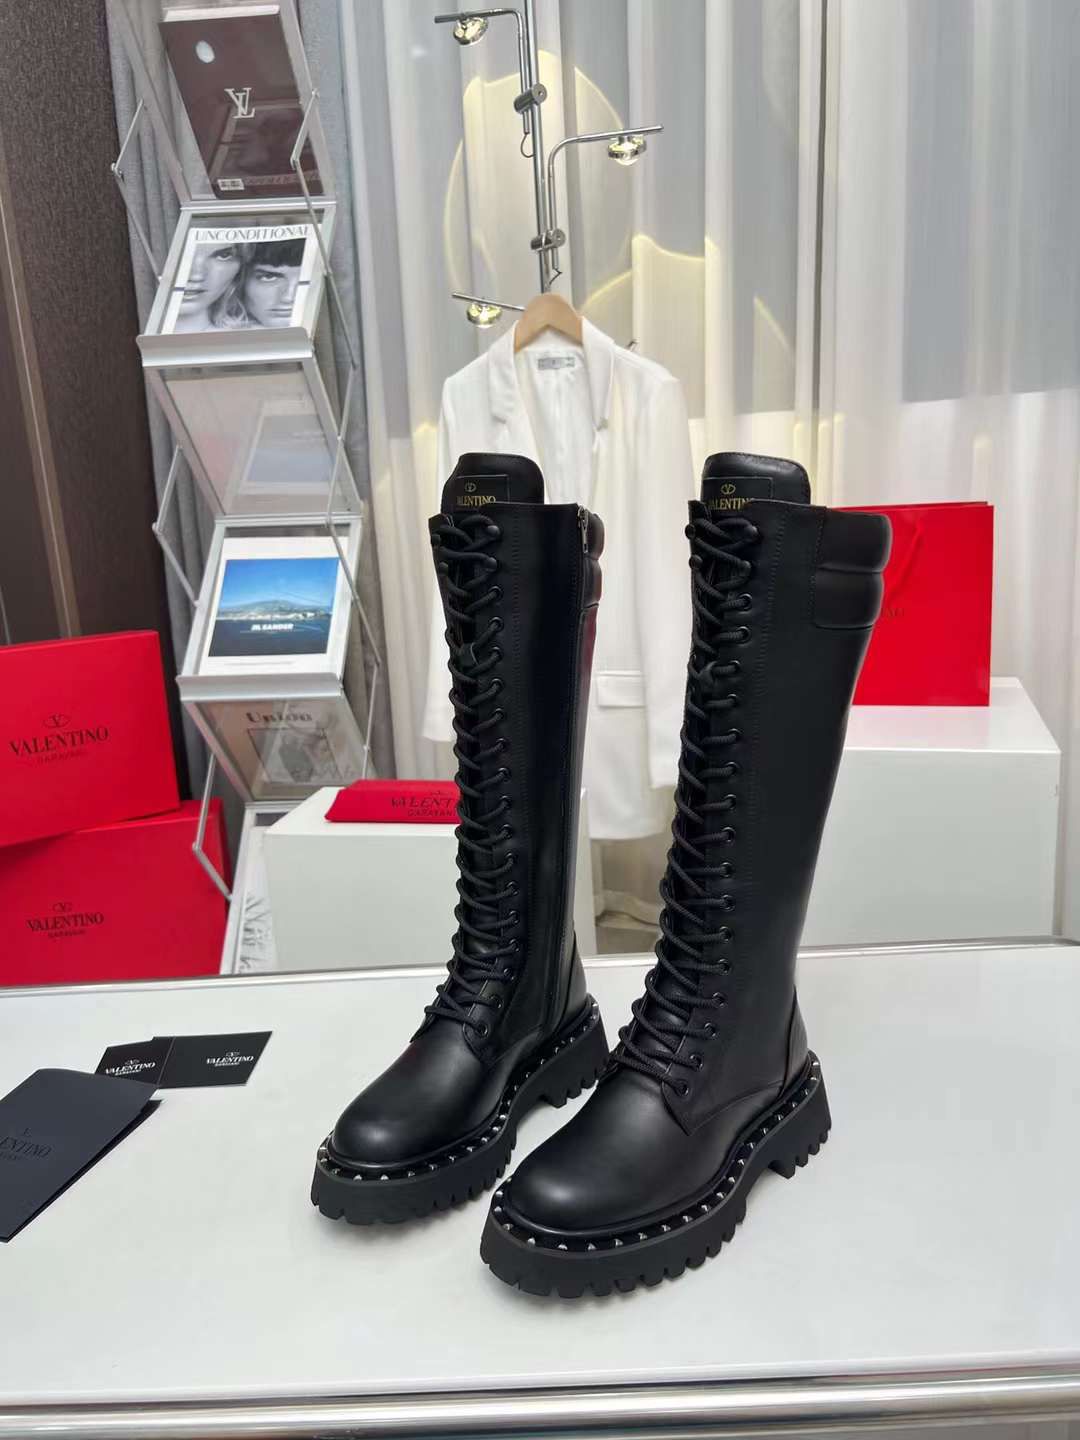 Kalentino Lace Up Boots